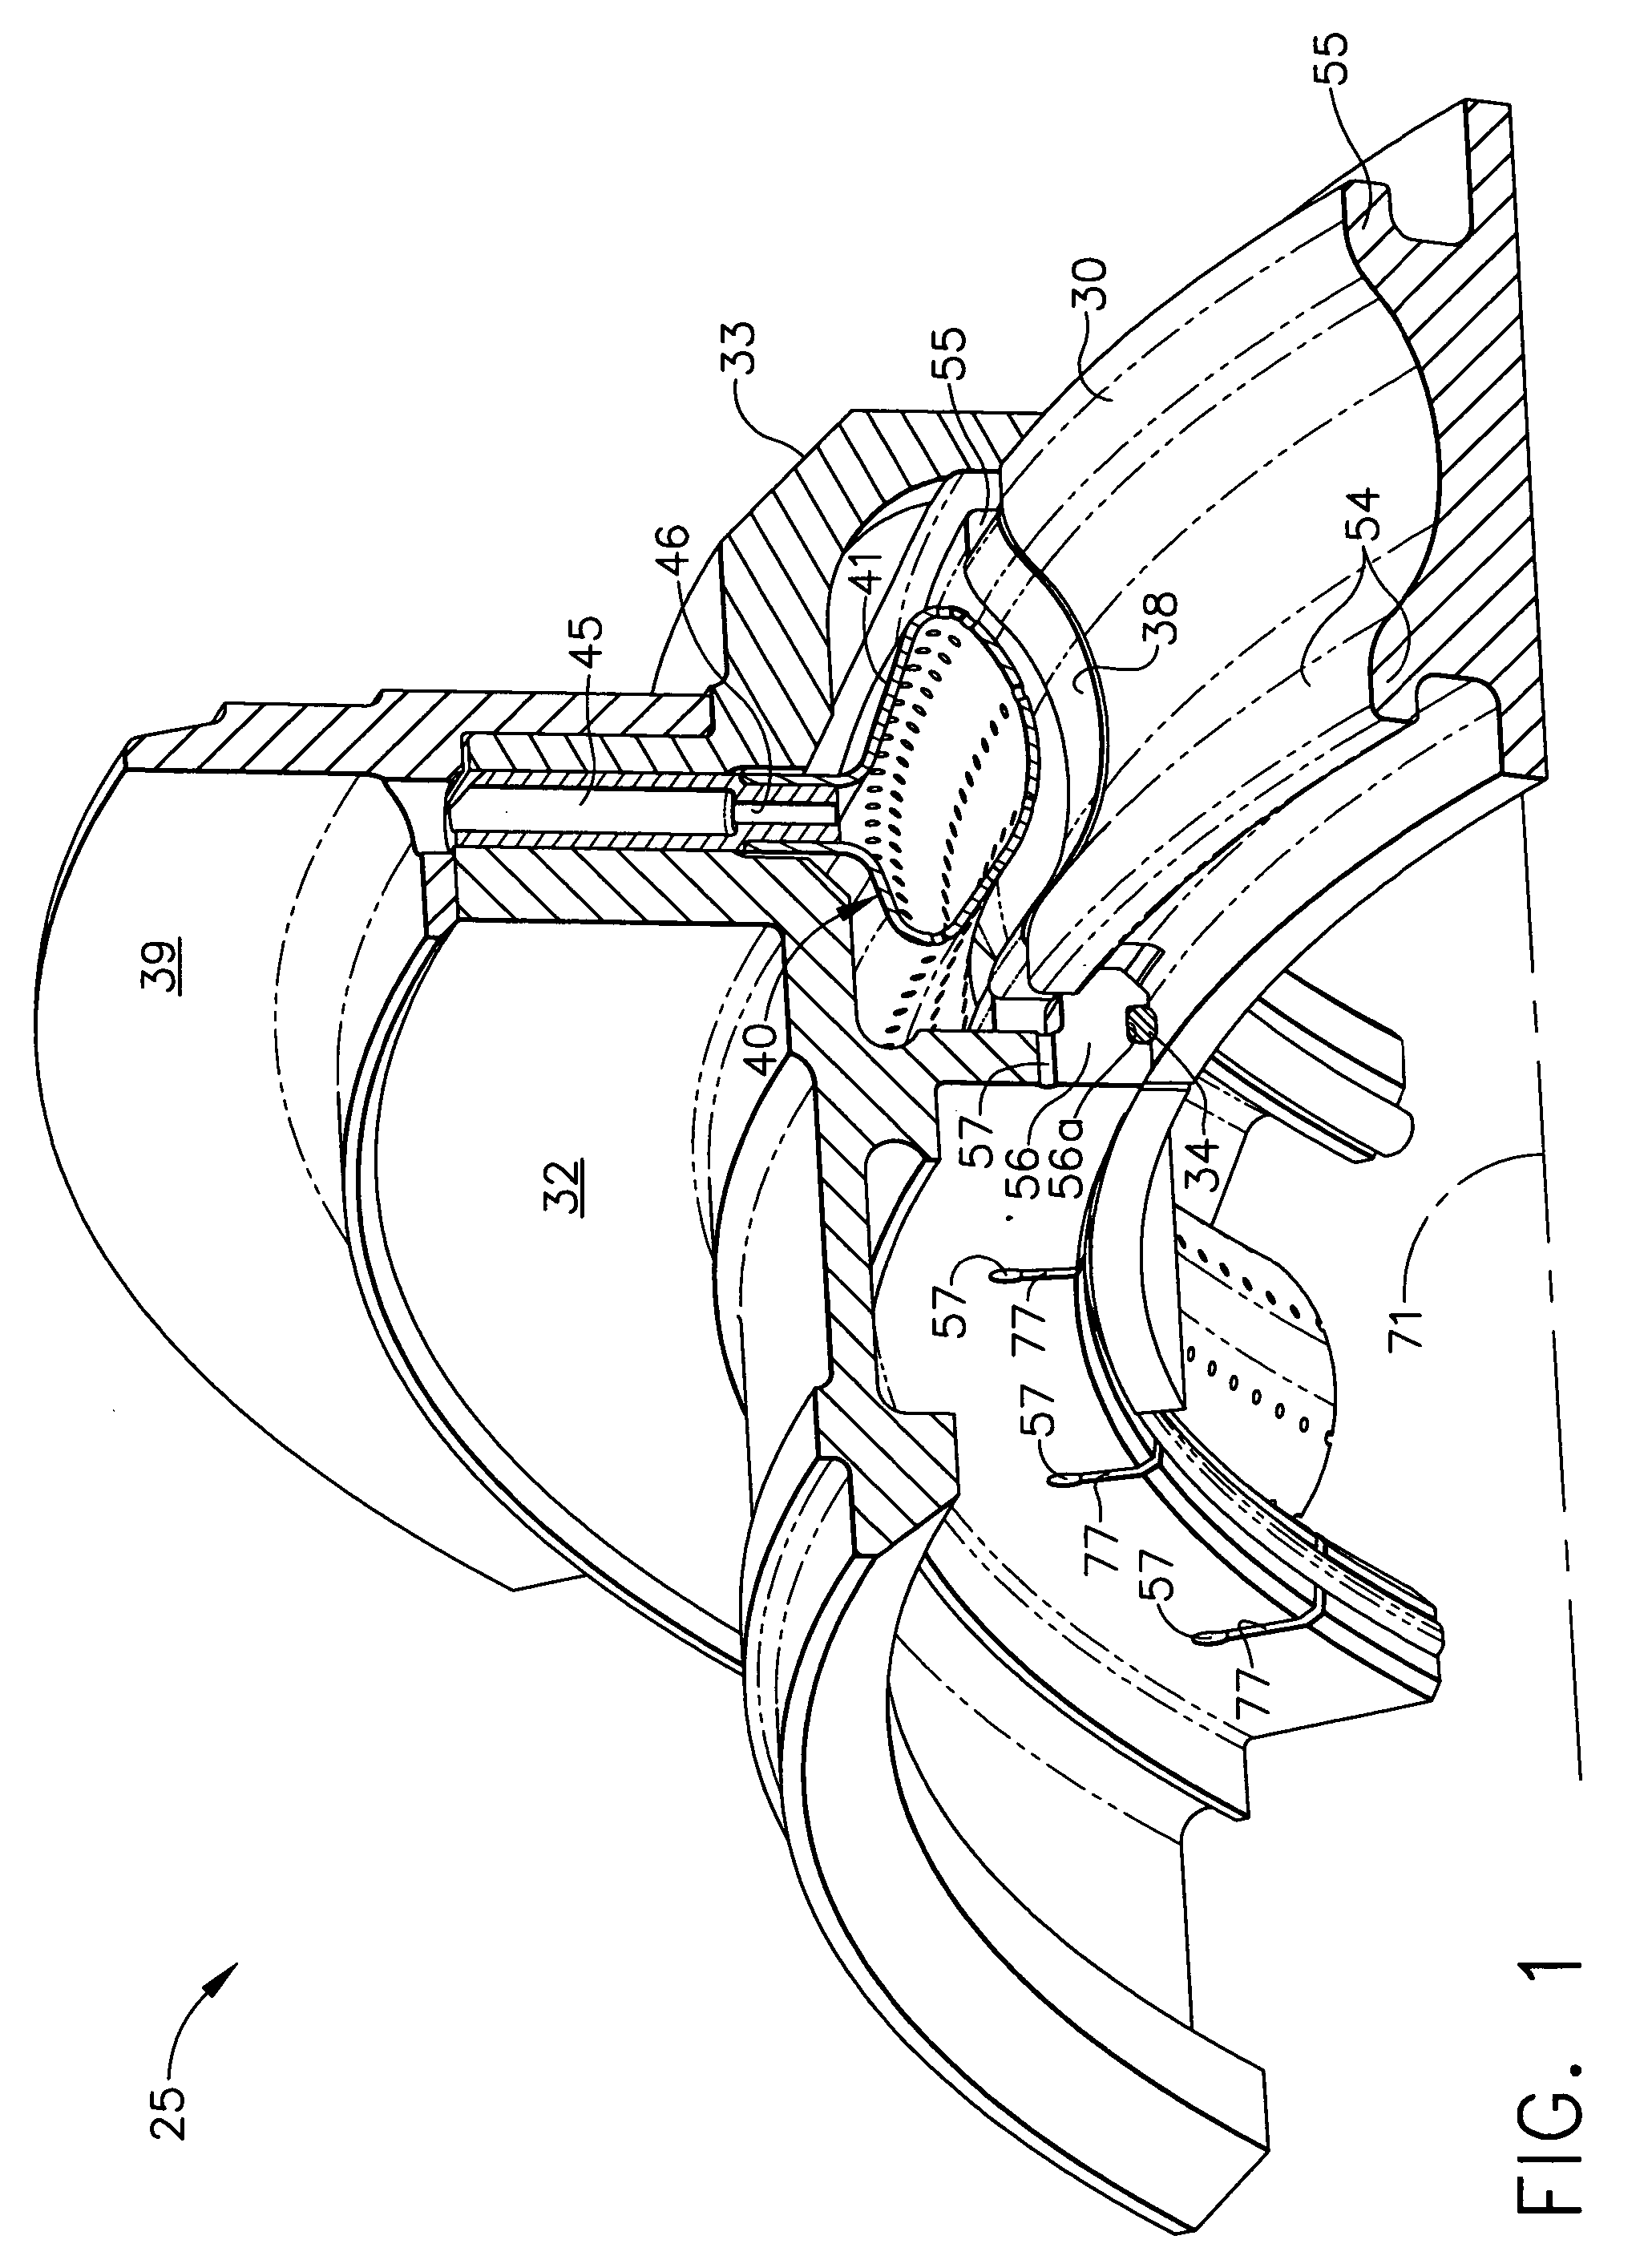 Gas turbine high temperature turbine blade outer air seal assembly